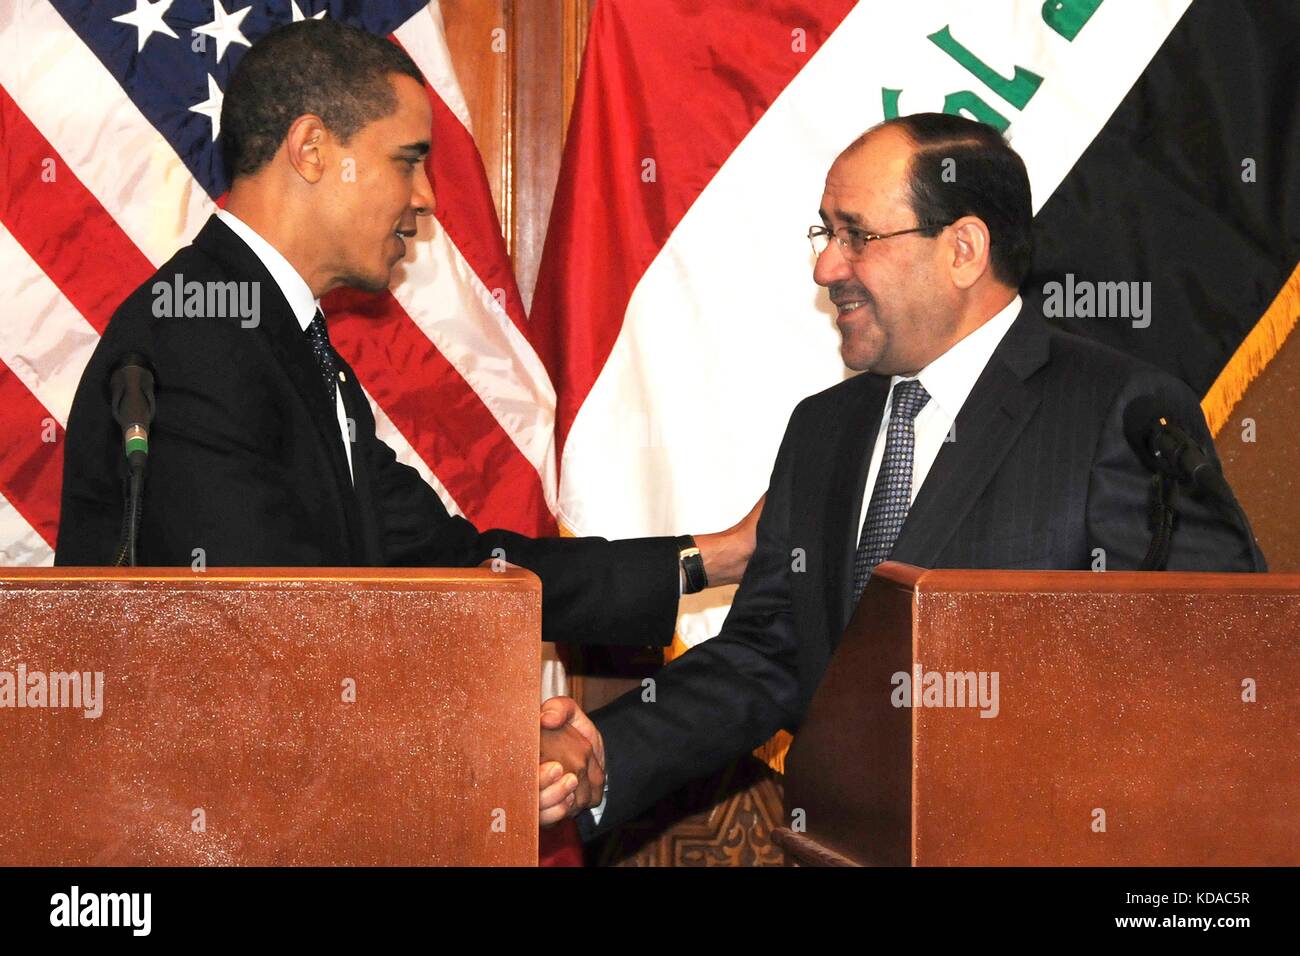 U.S. President Barack Obama shakes hands with Iraqi Prime Minister Nouri al-Maliki after a joint press conference at Camp Victory April 7, 2009 in Baghdad, Iraq. Stock Photo